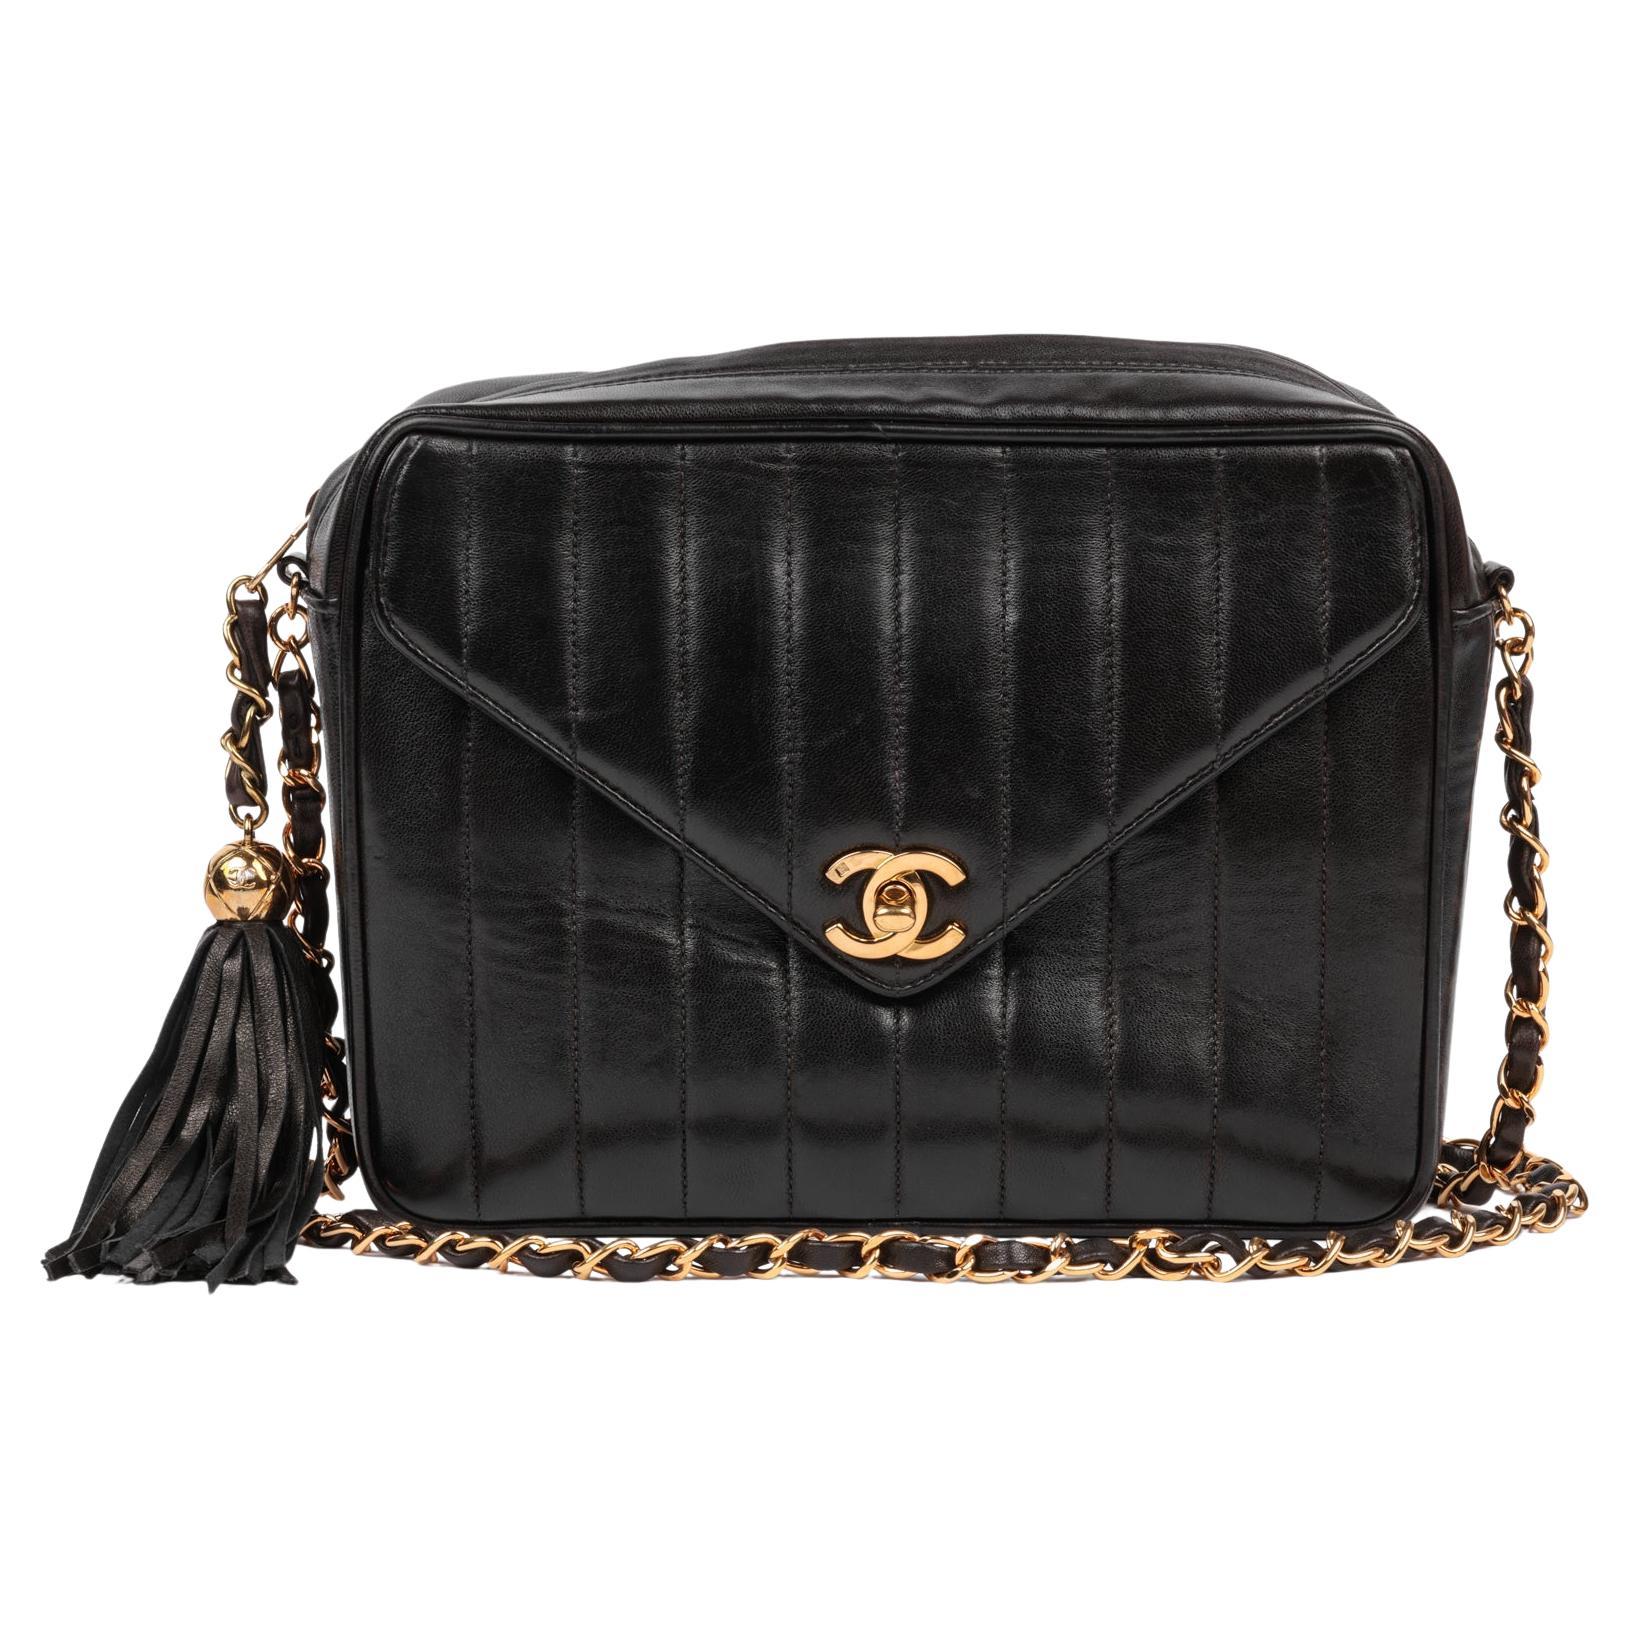 Chanel Black Vertical Quilted Lambskin Vintage Small Fringe